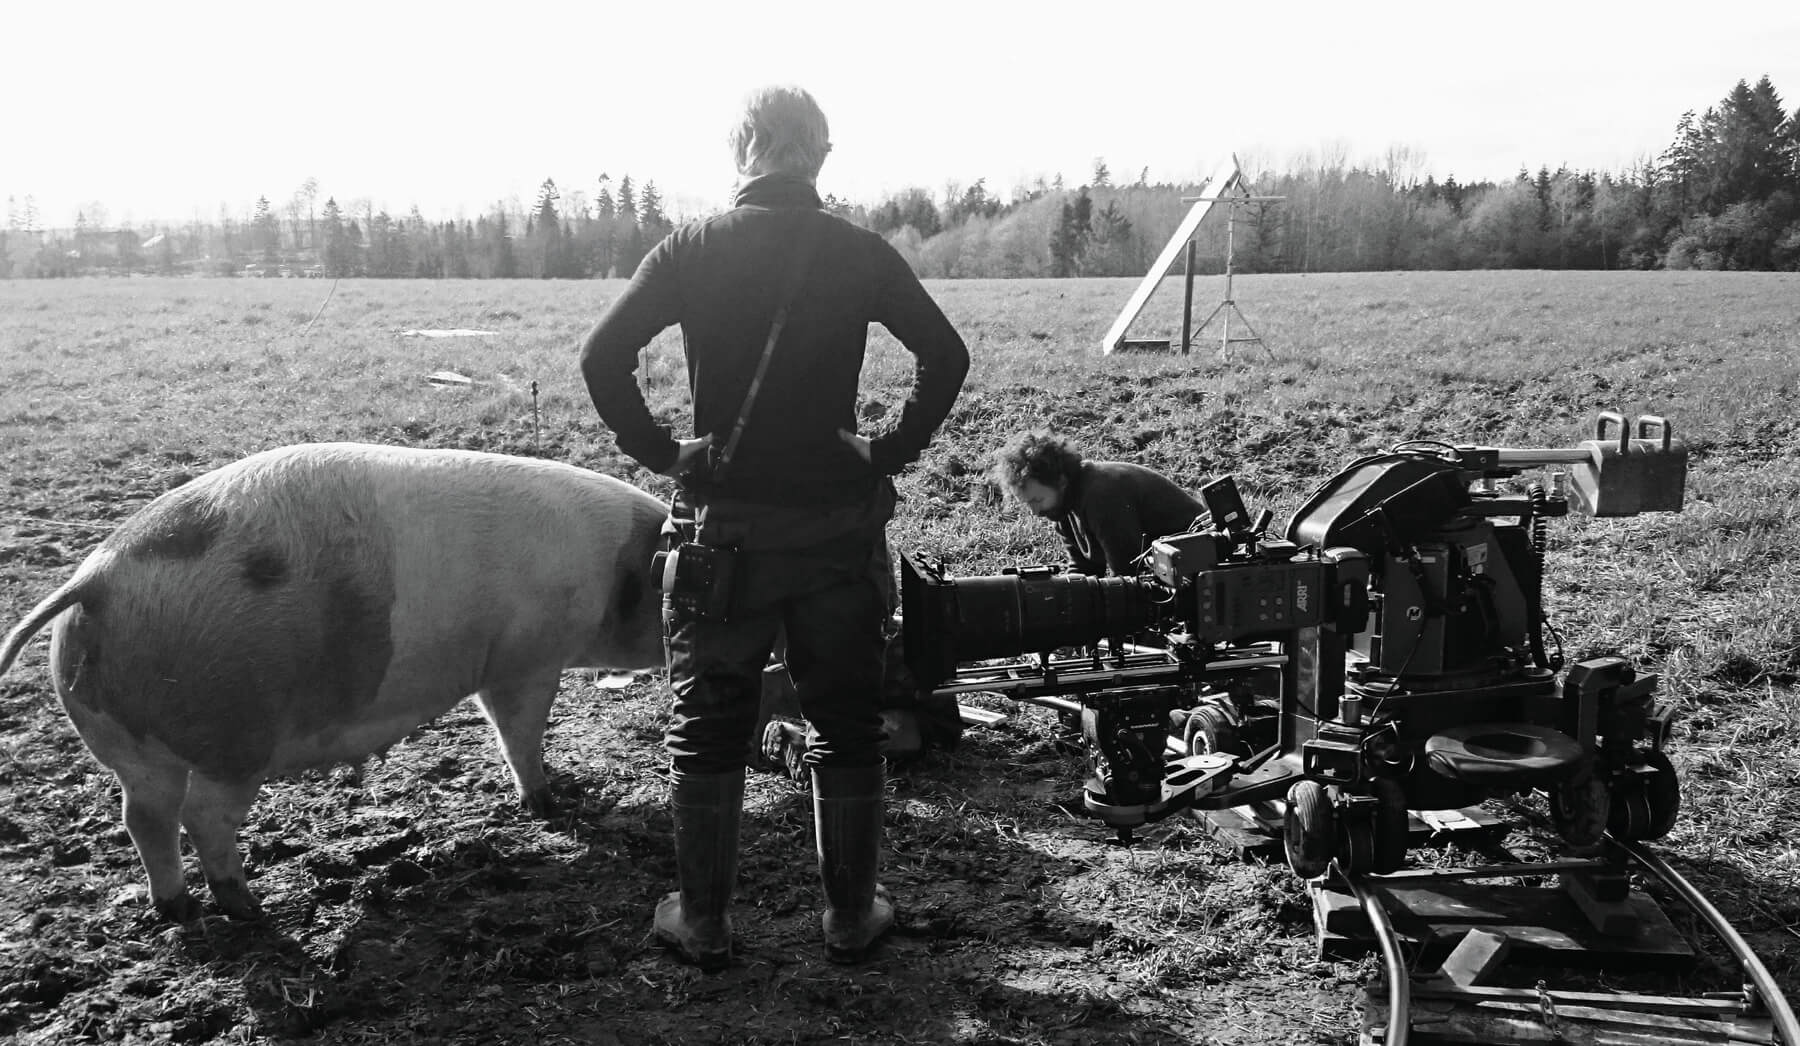 DOP Egil Håskjold Larsen stands between his camera and the eponymous pig on the location of Gunda